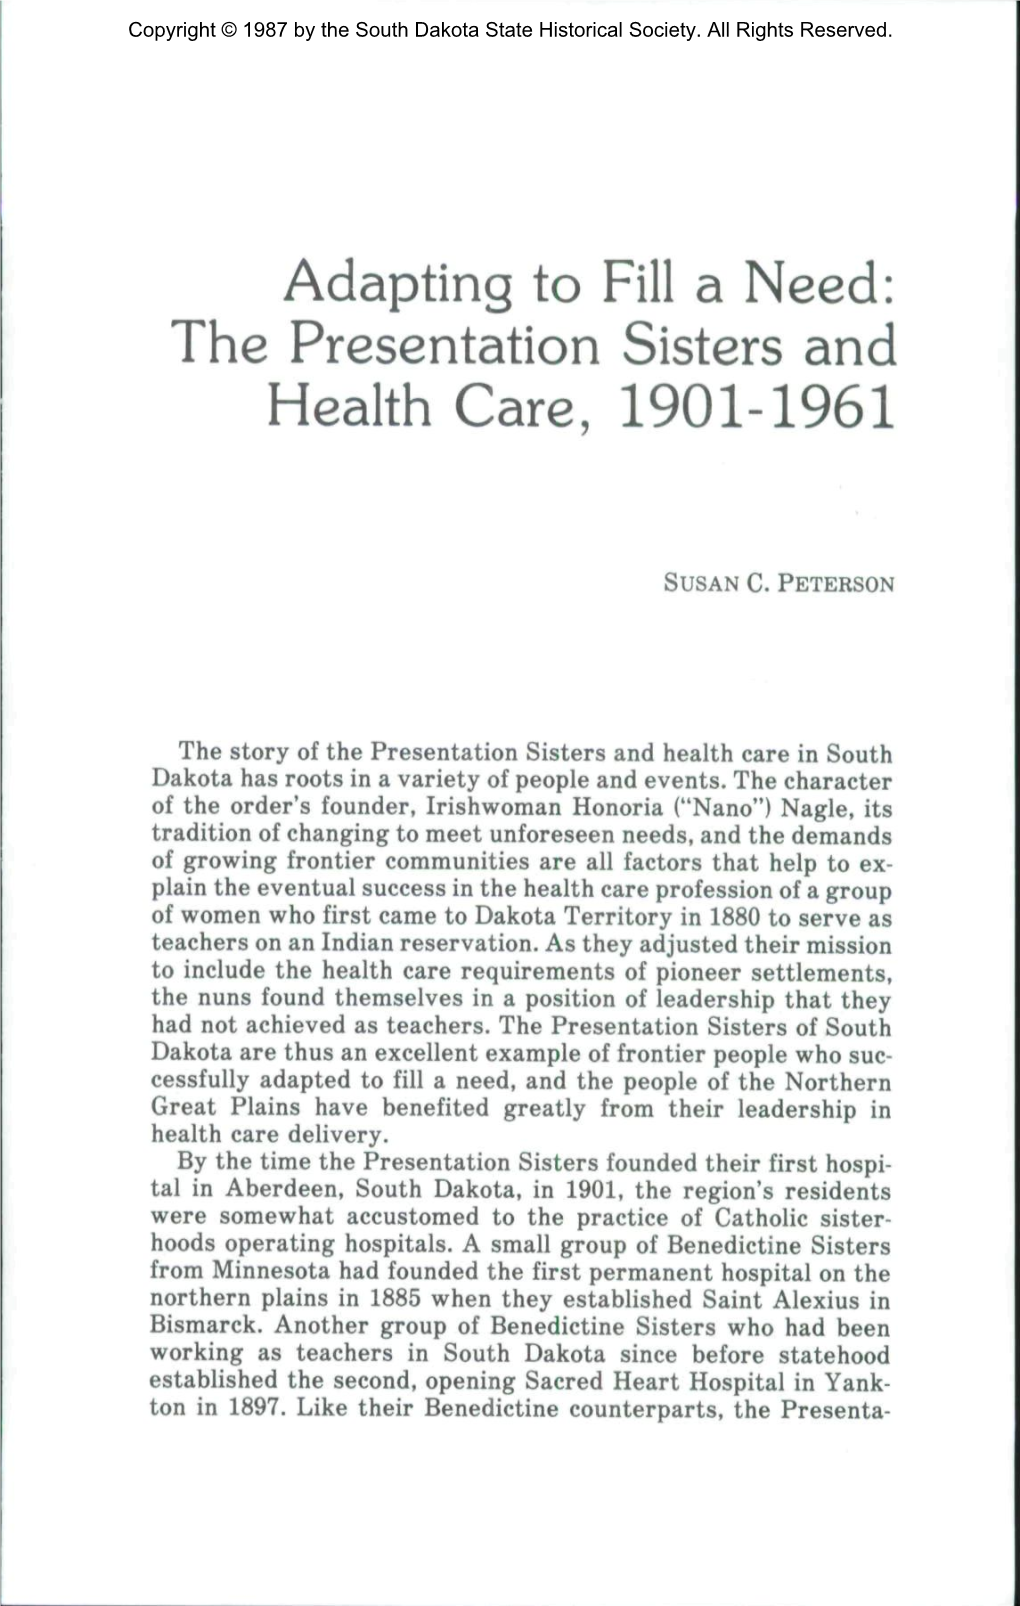 Adapting to Fill a Need: the Presentation Sisters and Health Care, 1901-1961